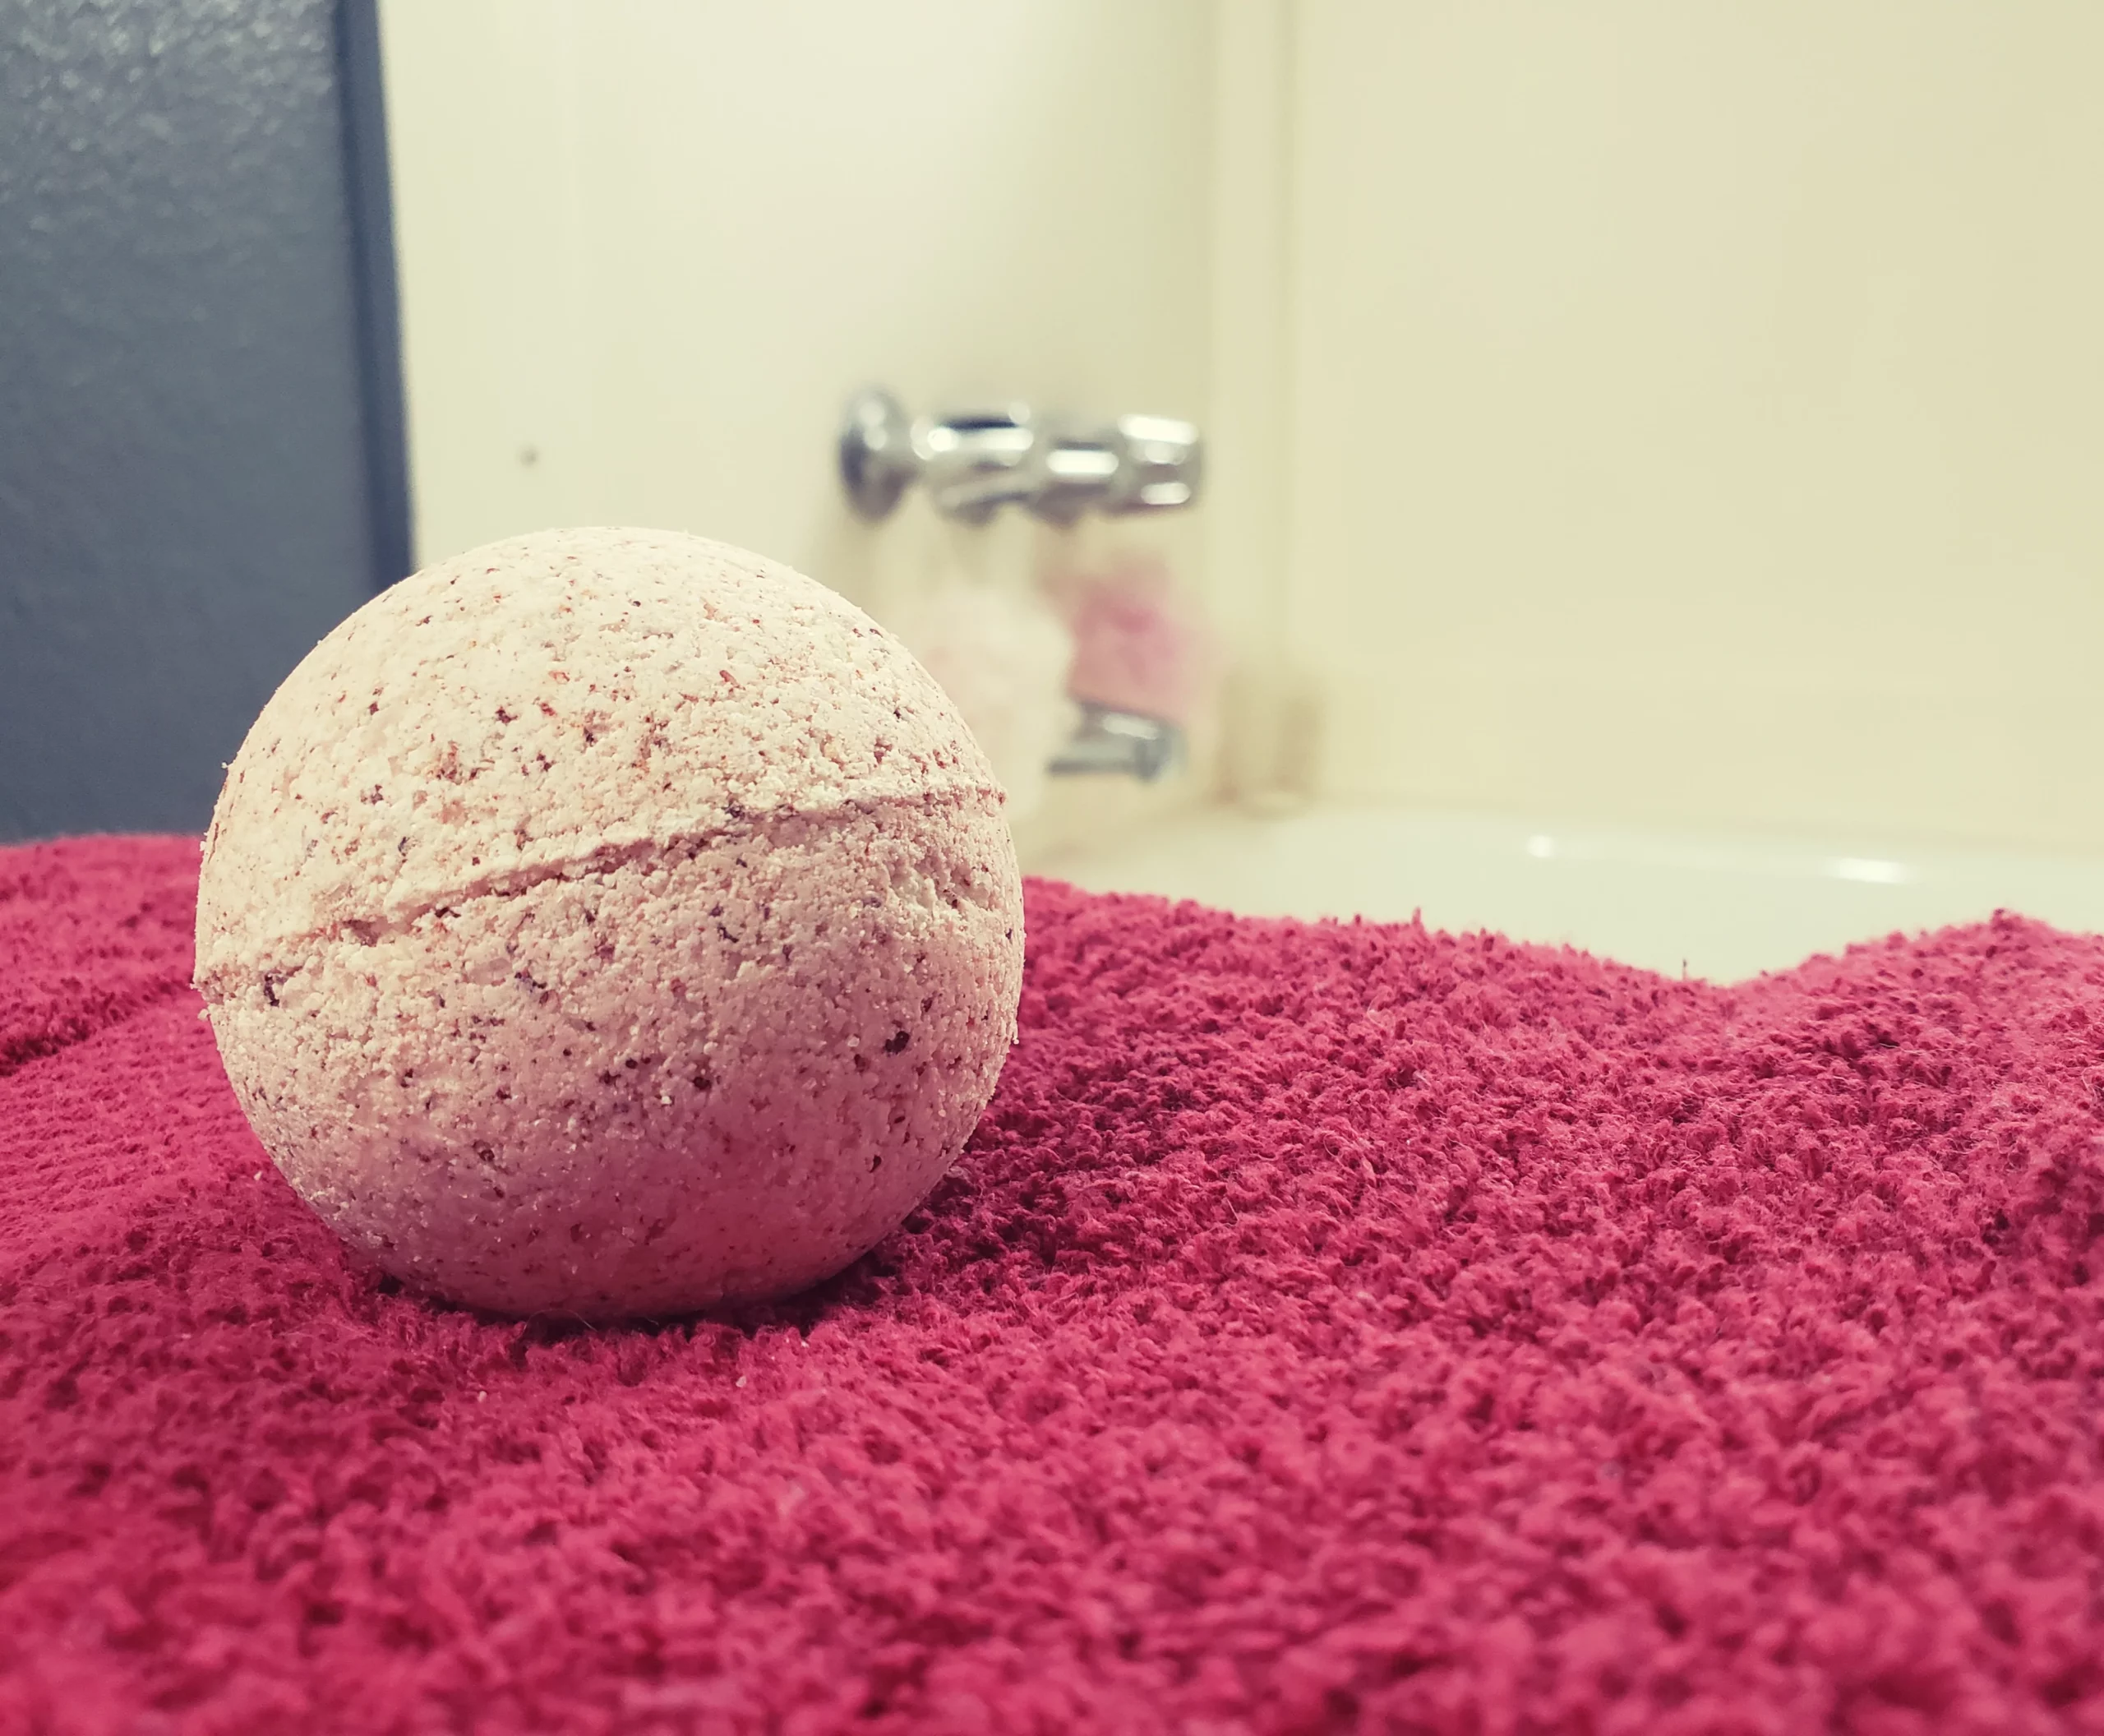 THE SURPRISING TRUTH ABOUT CBD BATH BOMBS YOU WON'T BELIEVE